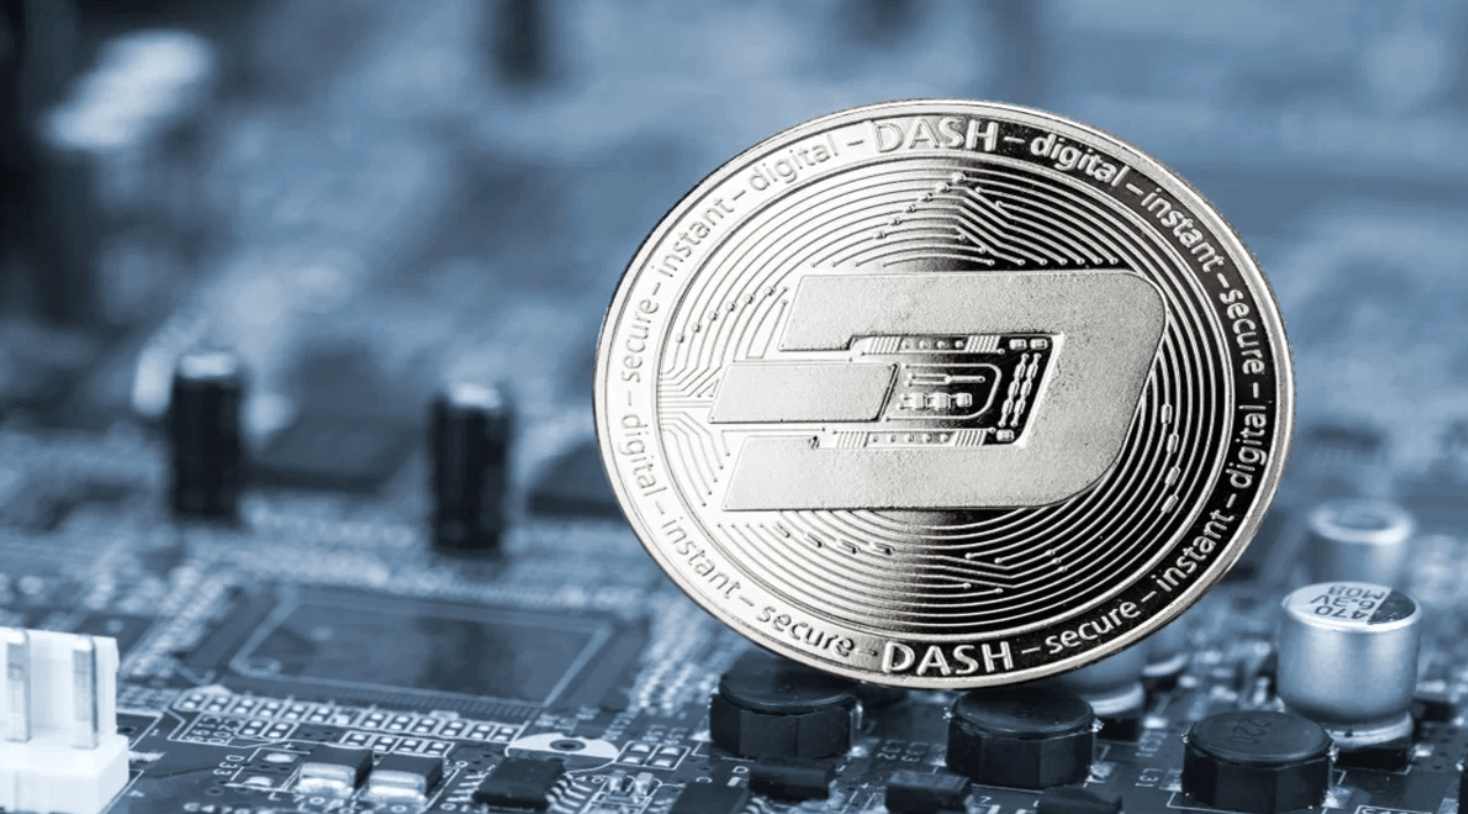 How to Buy Dash Coin?